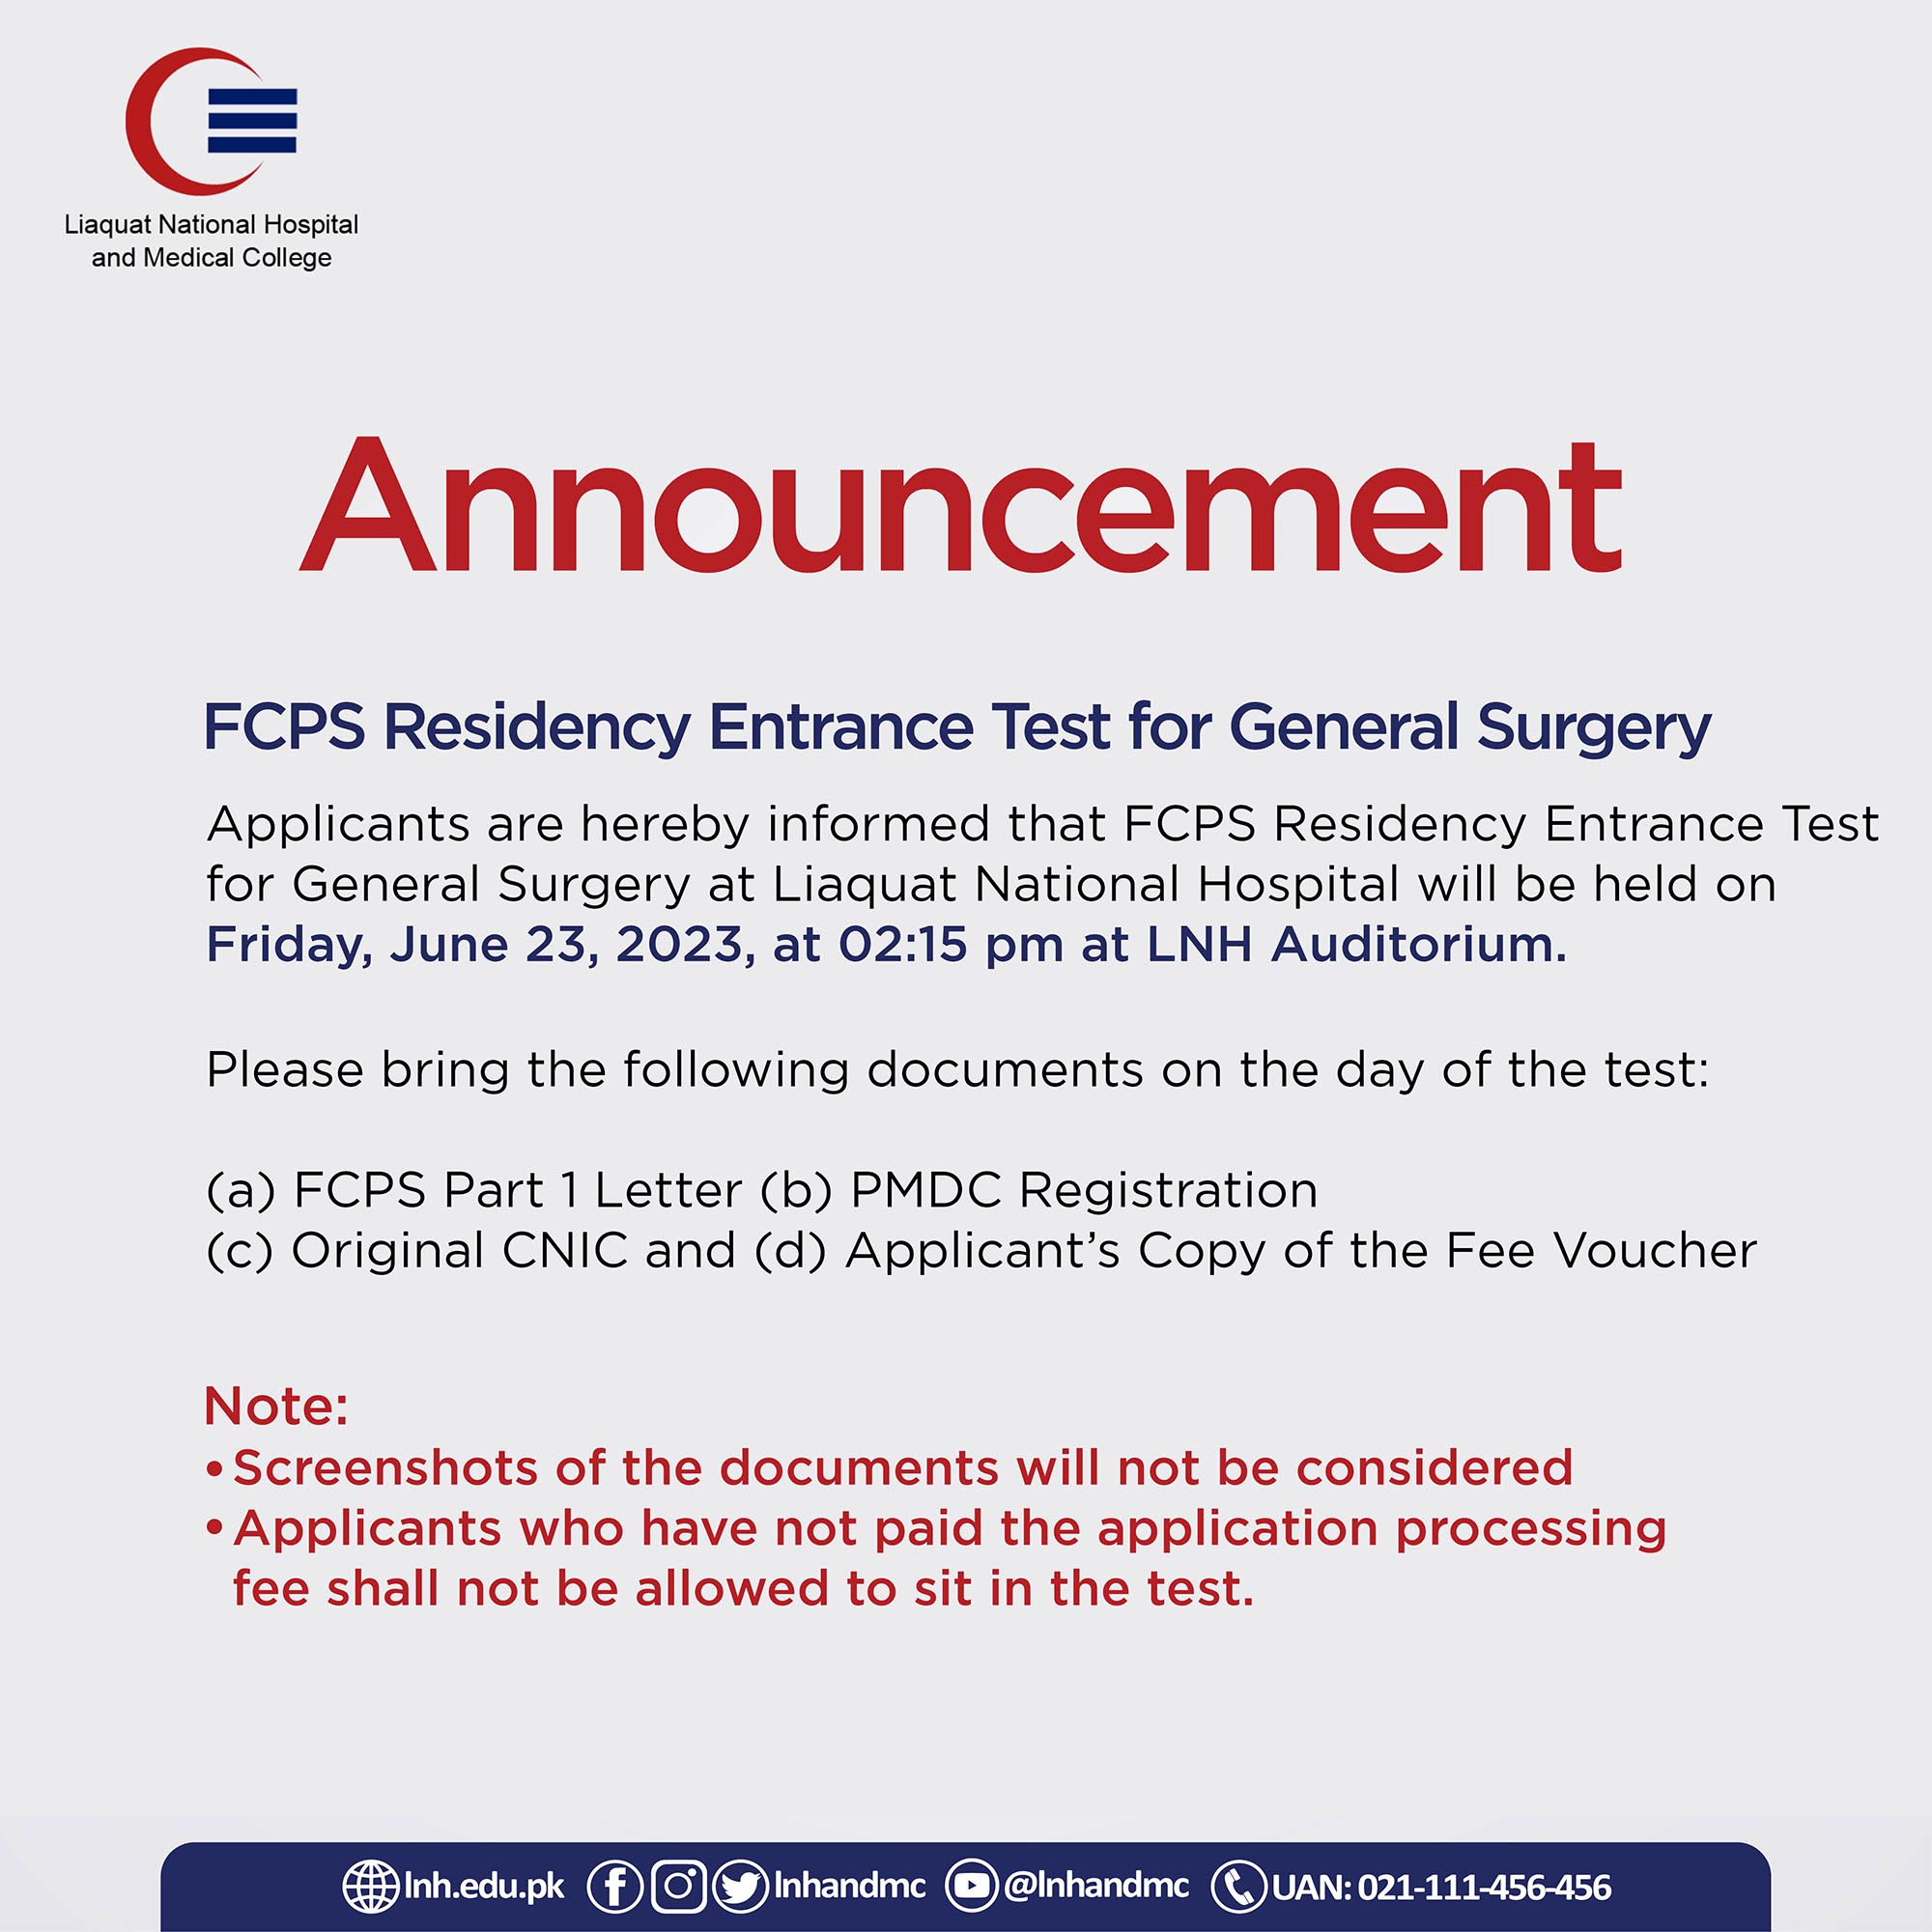 FCPS Residency Entrance Test for General Surgery